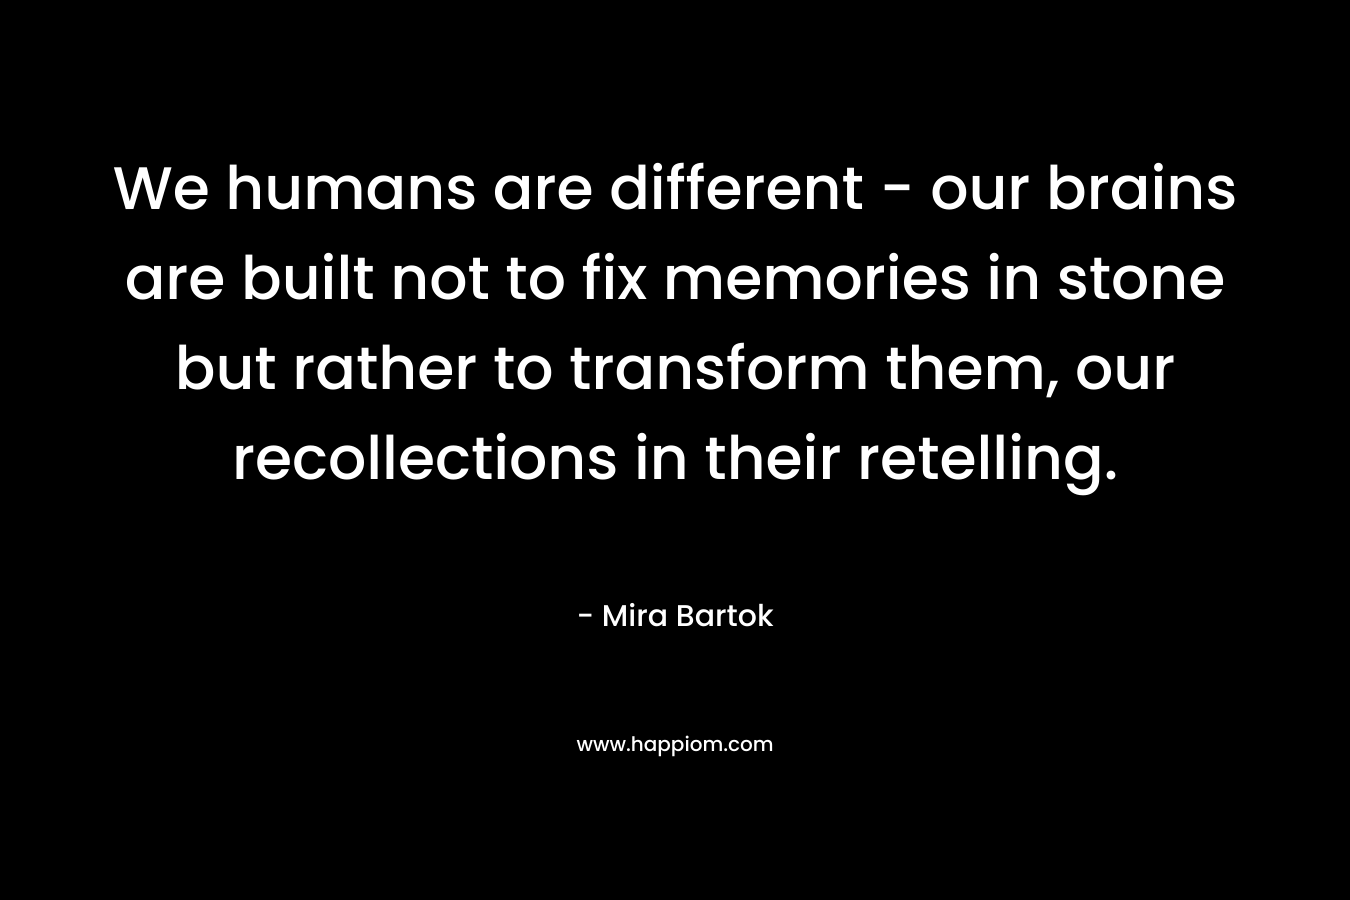 We humans are different – our brains are built not to fix memories in stone but rather to transform them, our recollections in their retelling. – Mira Bartok